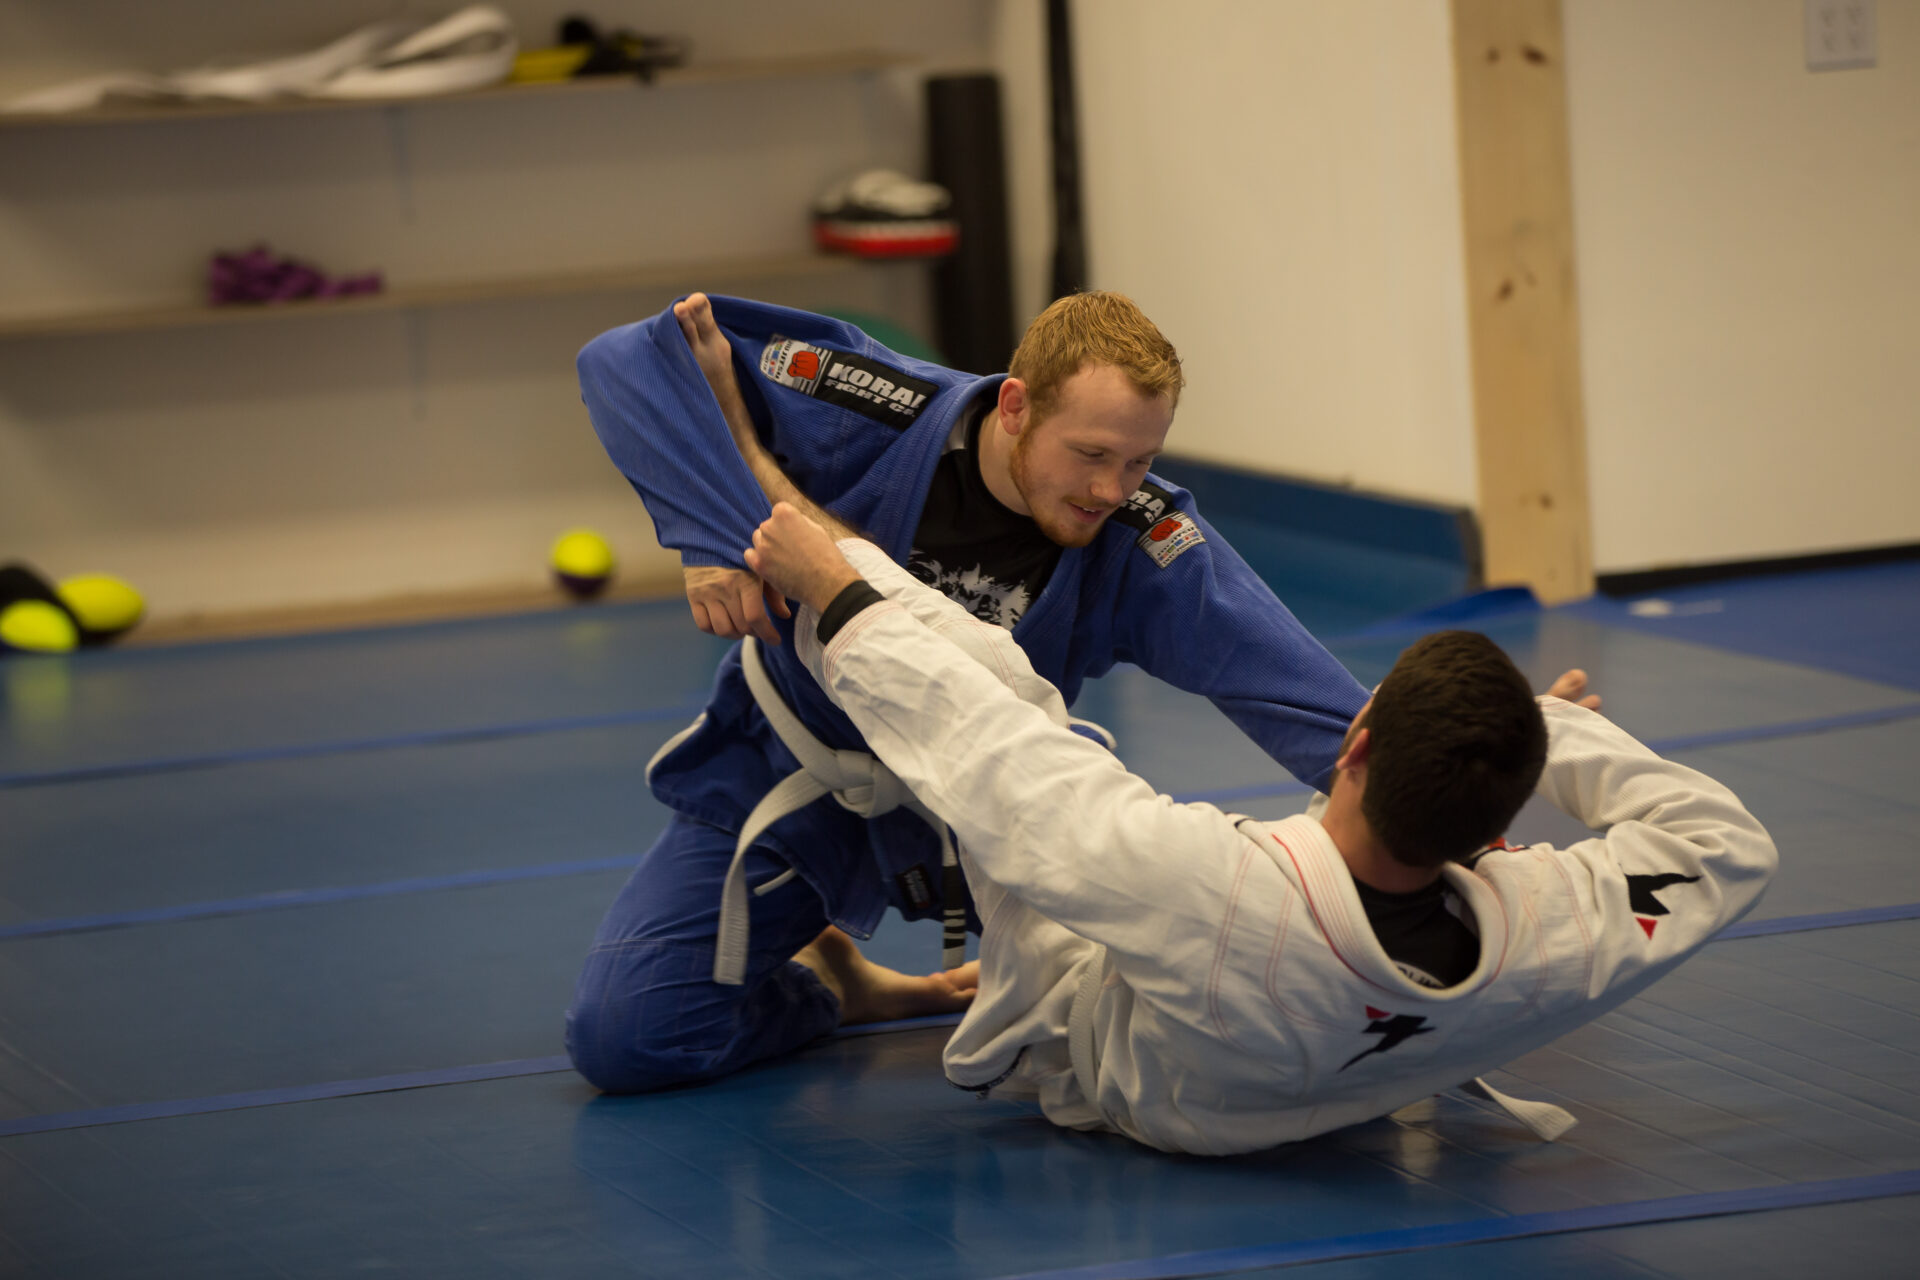 Two men are practicing judo on a blue floor.